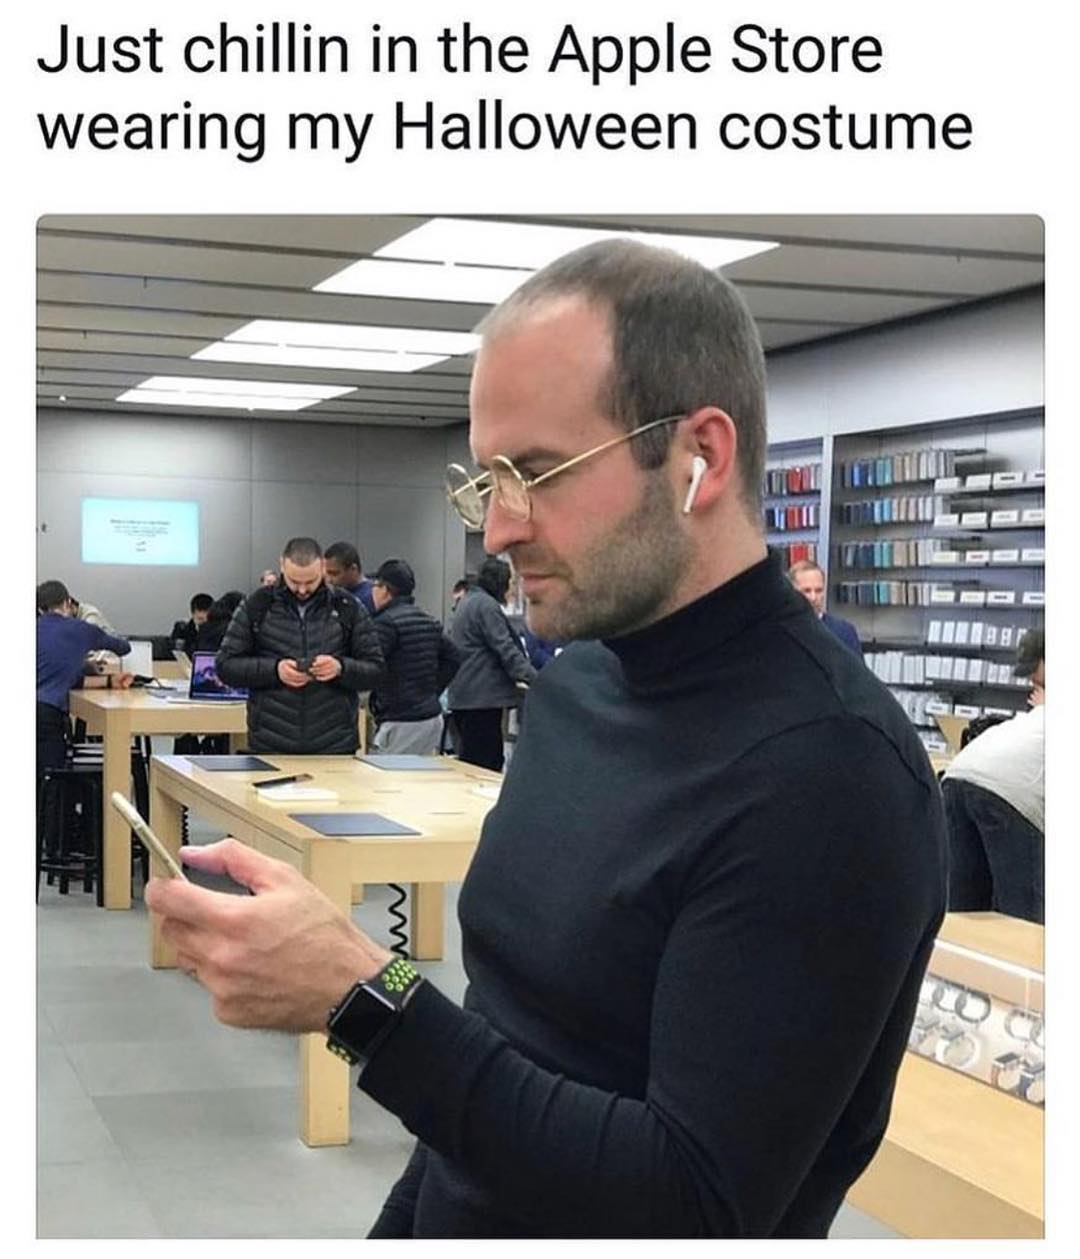 Just chillin in the Apple Store wearing my Halloween costume.